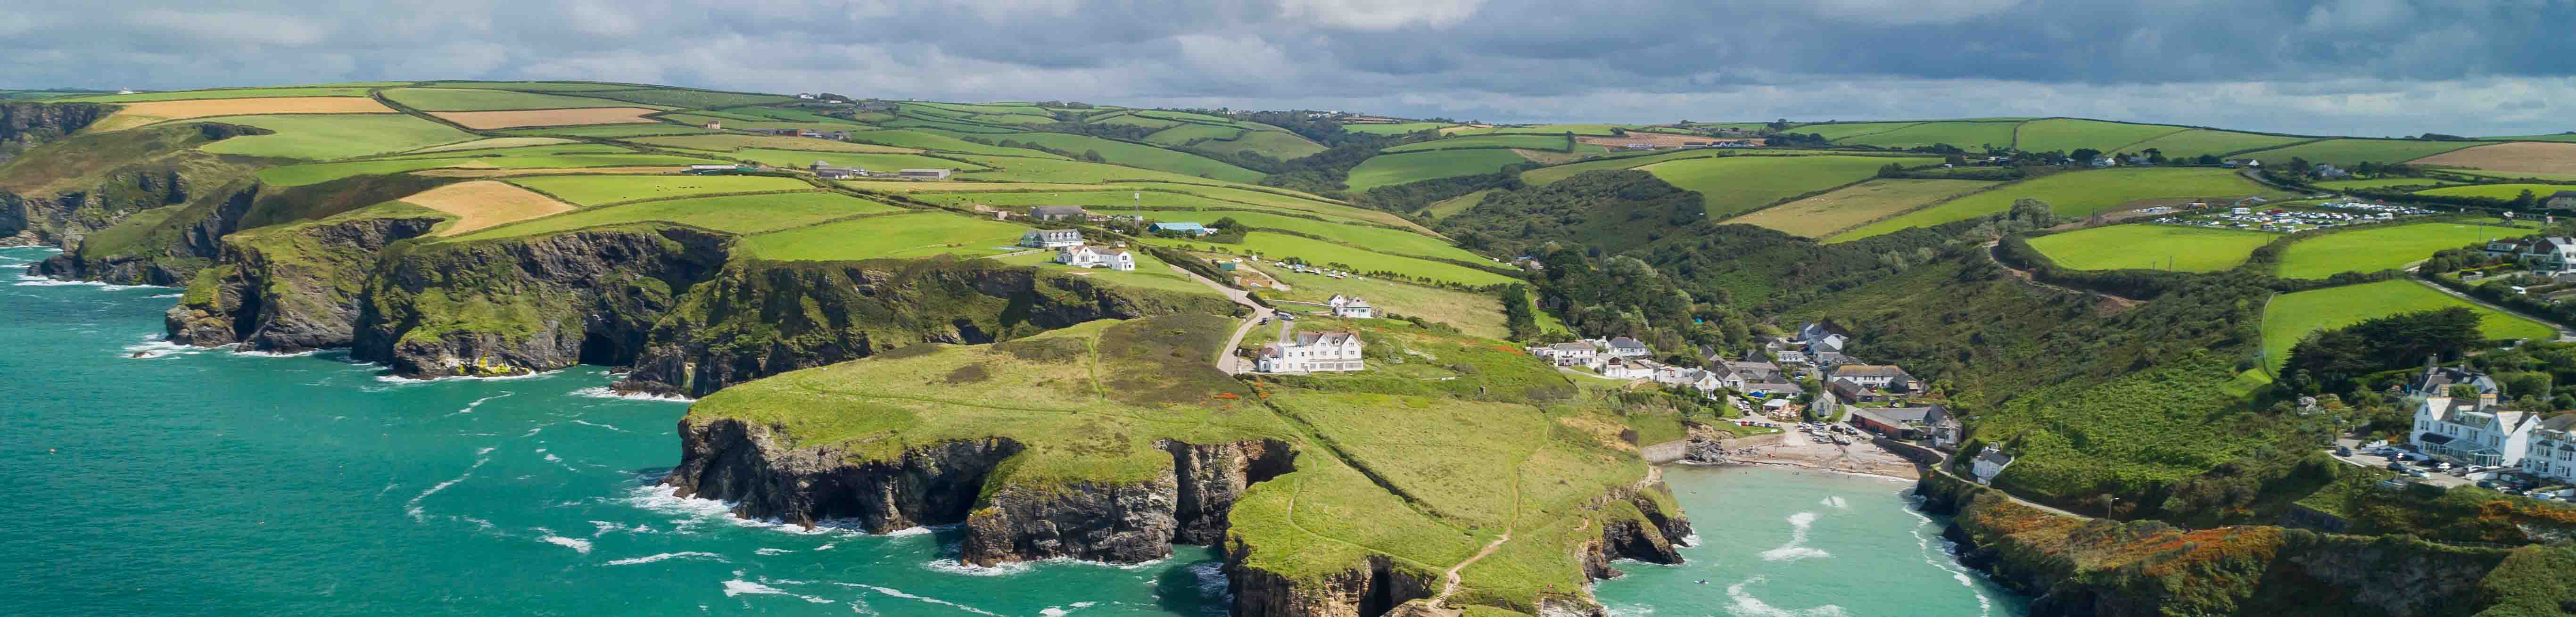 Silver Spray: An aerial view of this iconic holiday cottage